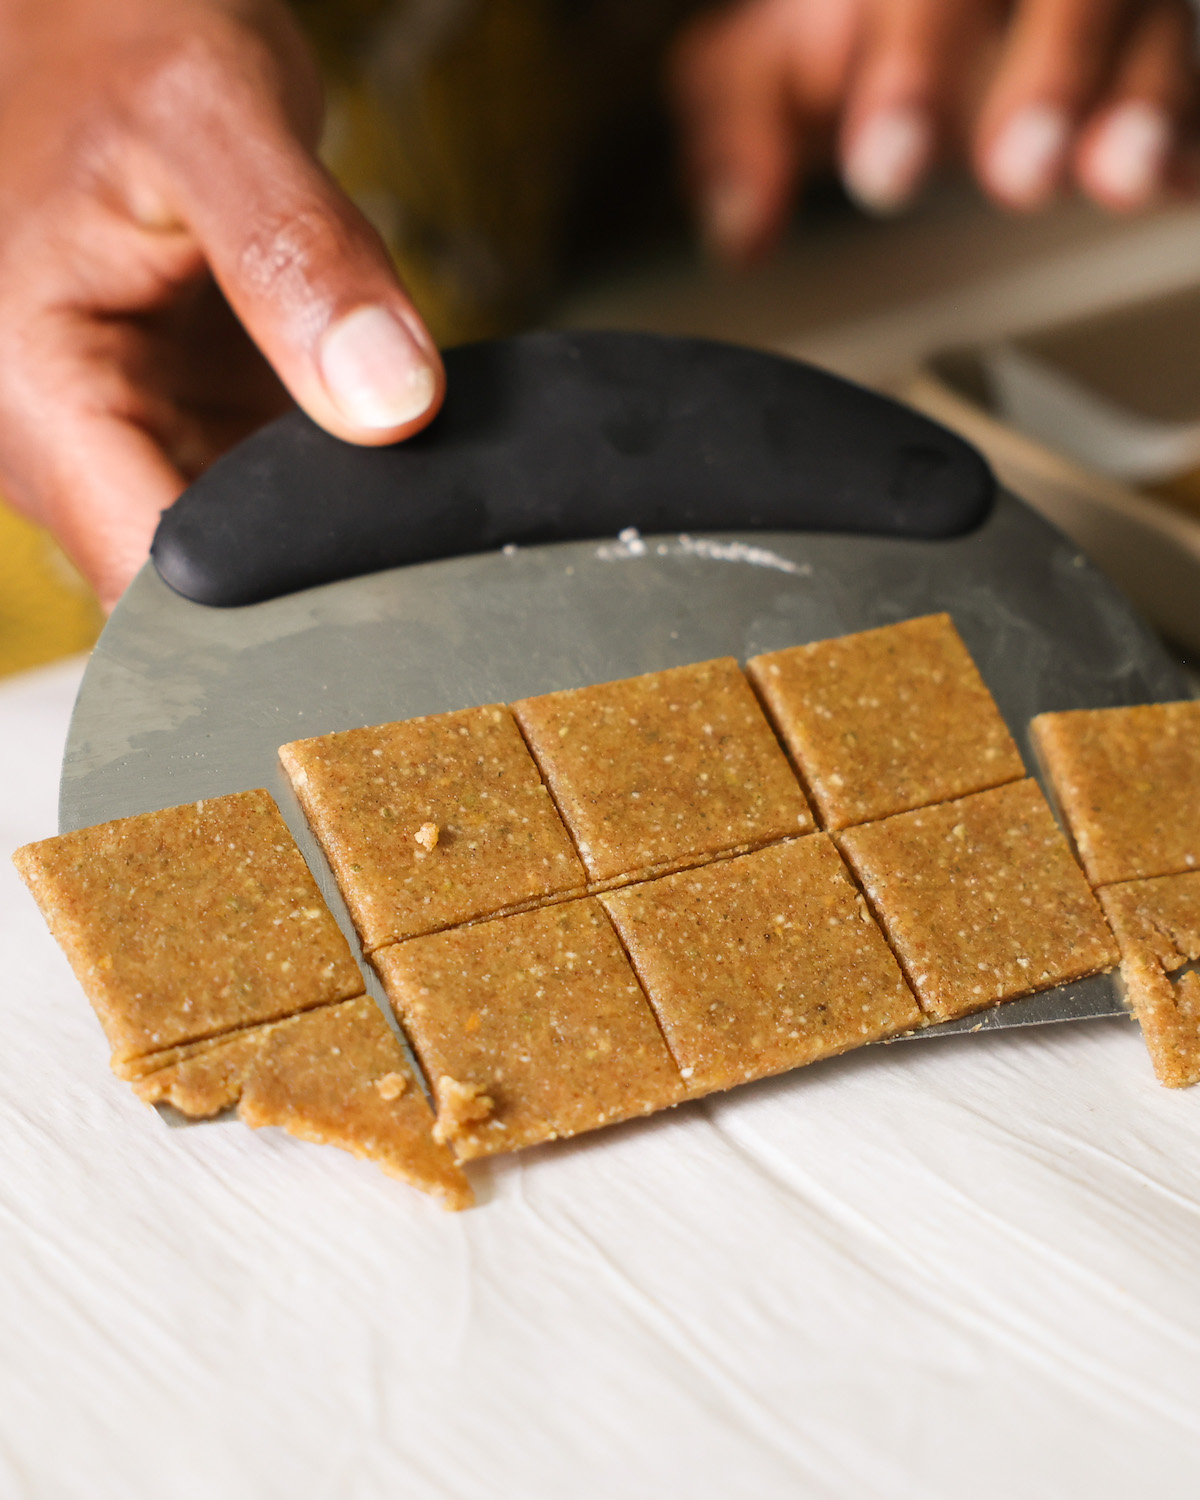 Scraping the "cheesy" pumpkin seed crackers off of the counter with a bench scraper.